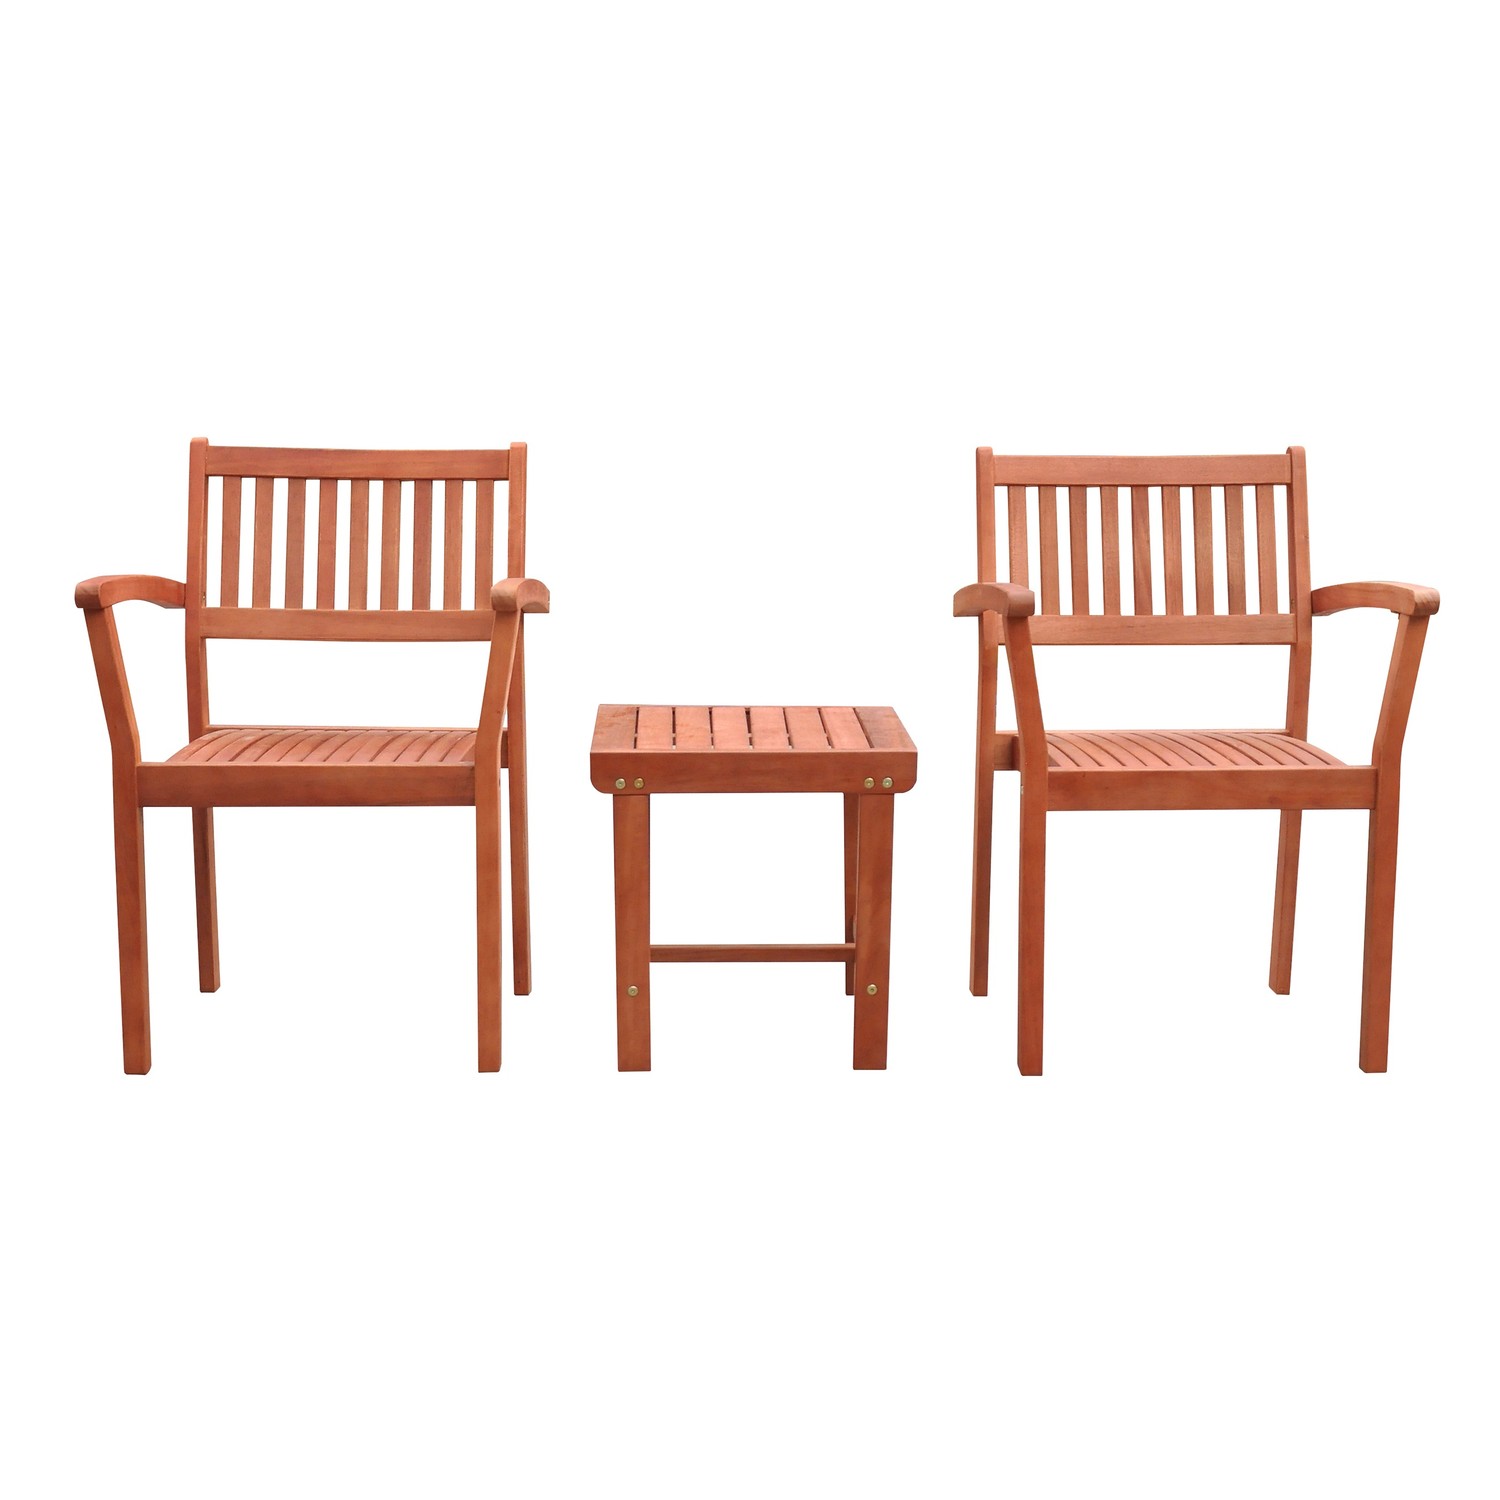 Malibu Outdoor Patio 3-Piece Wood Dining Set with Stacking Chair